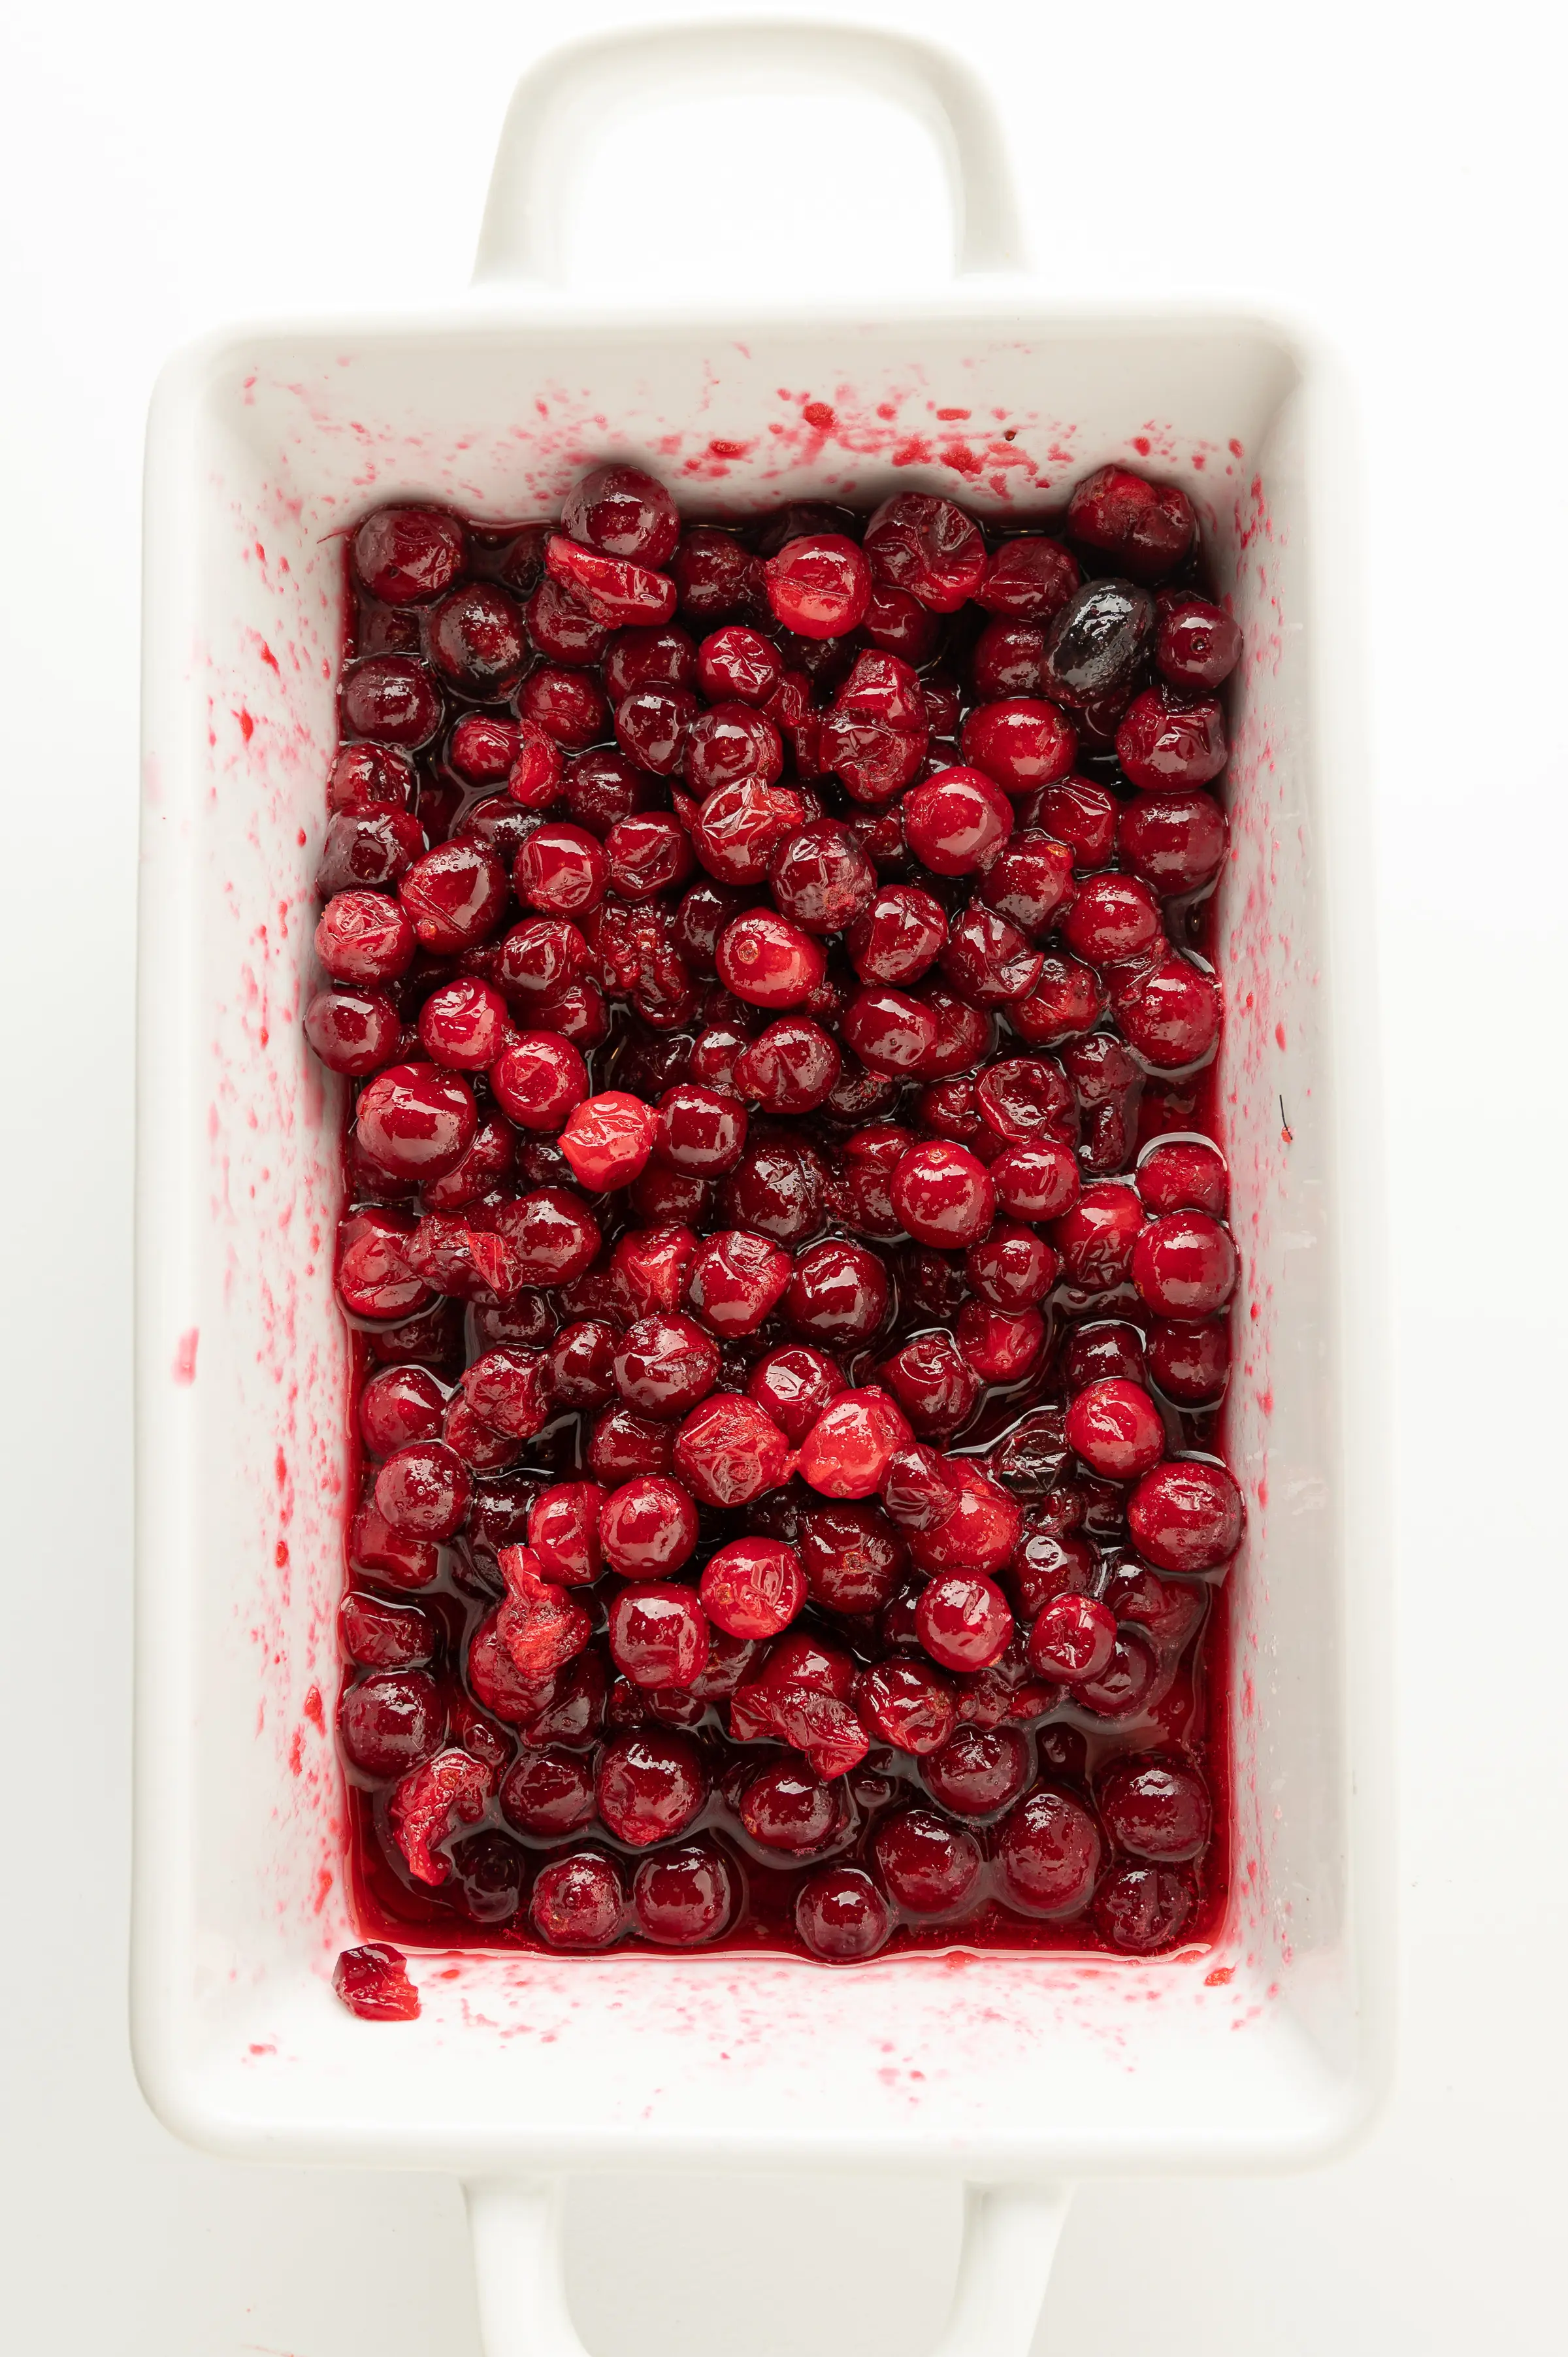 A white dish filled with ruby red berries glossy coated with a thick syrup. 